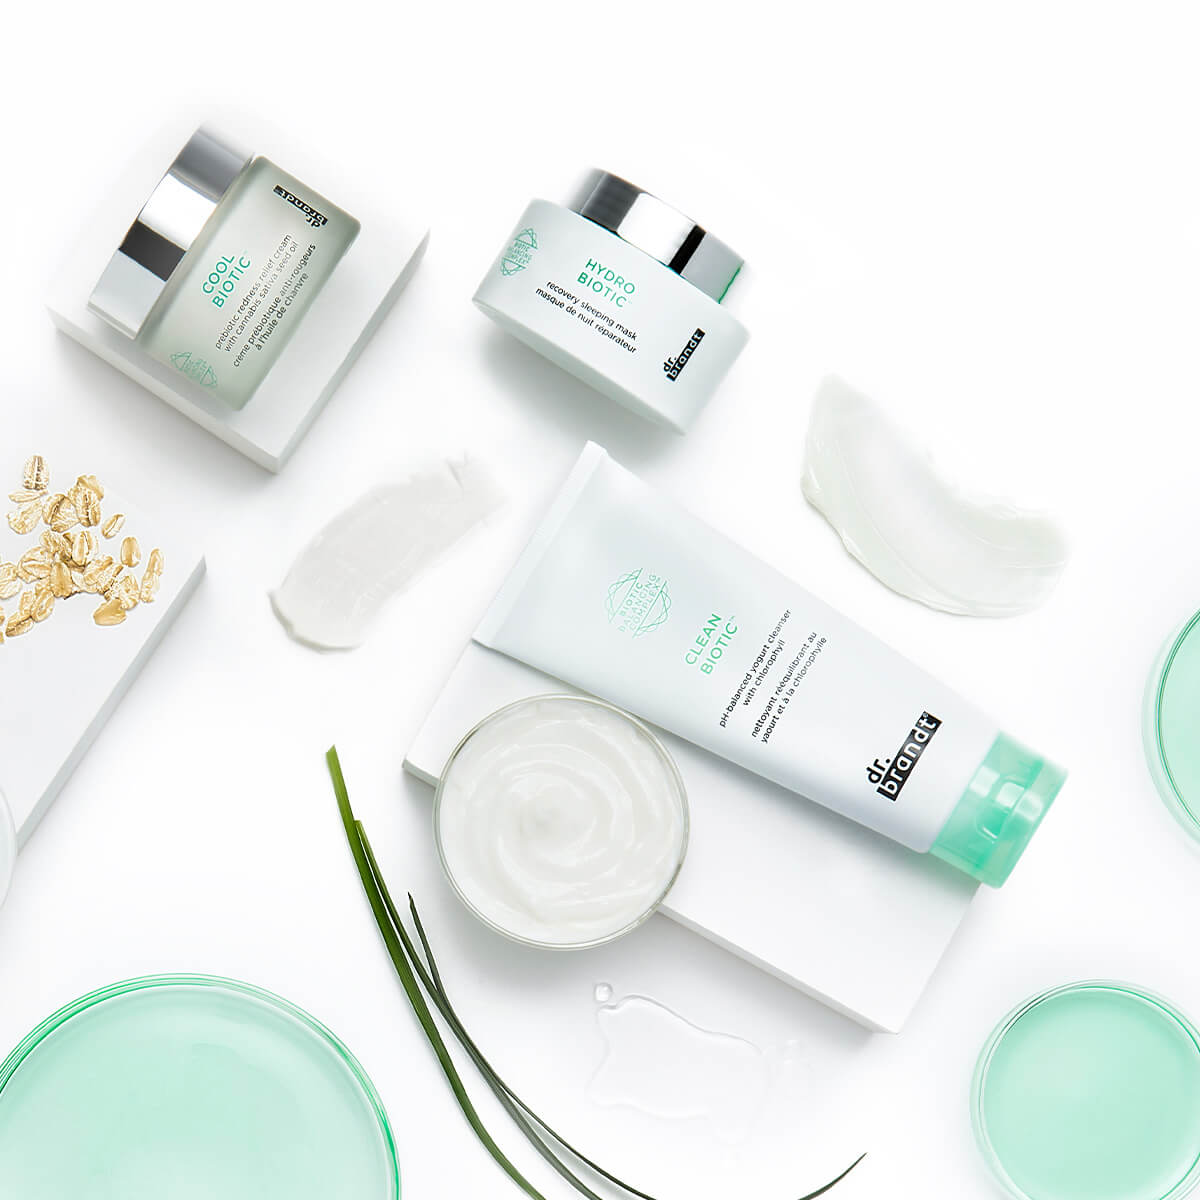 Prebiotics product collection. Formulas infused with exclusive BIOTIC BALANCING COMPLEX™, combining pre- and postbiotics, along with soothing actives to bring skin back to balance. shop now